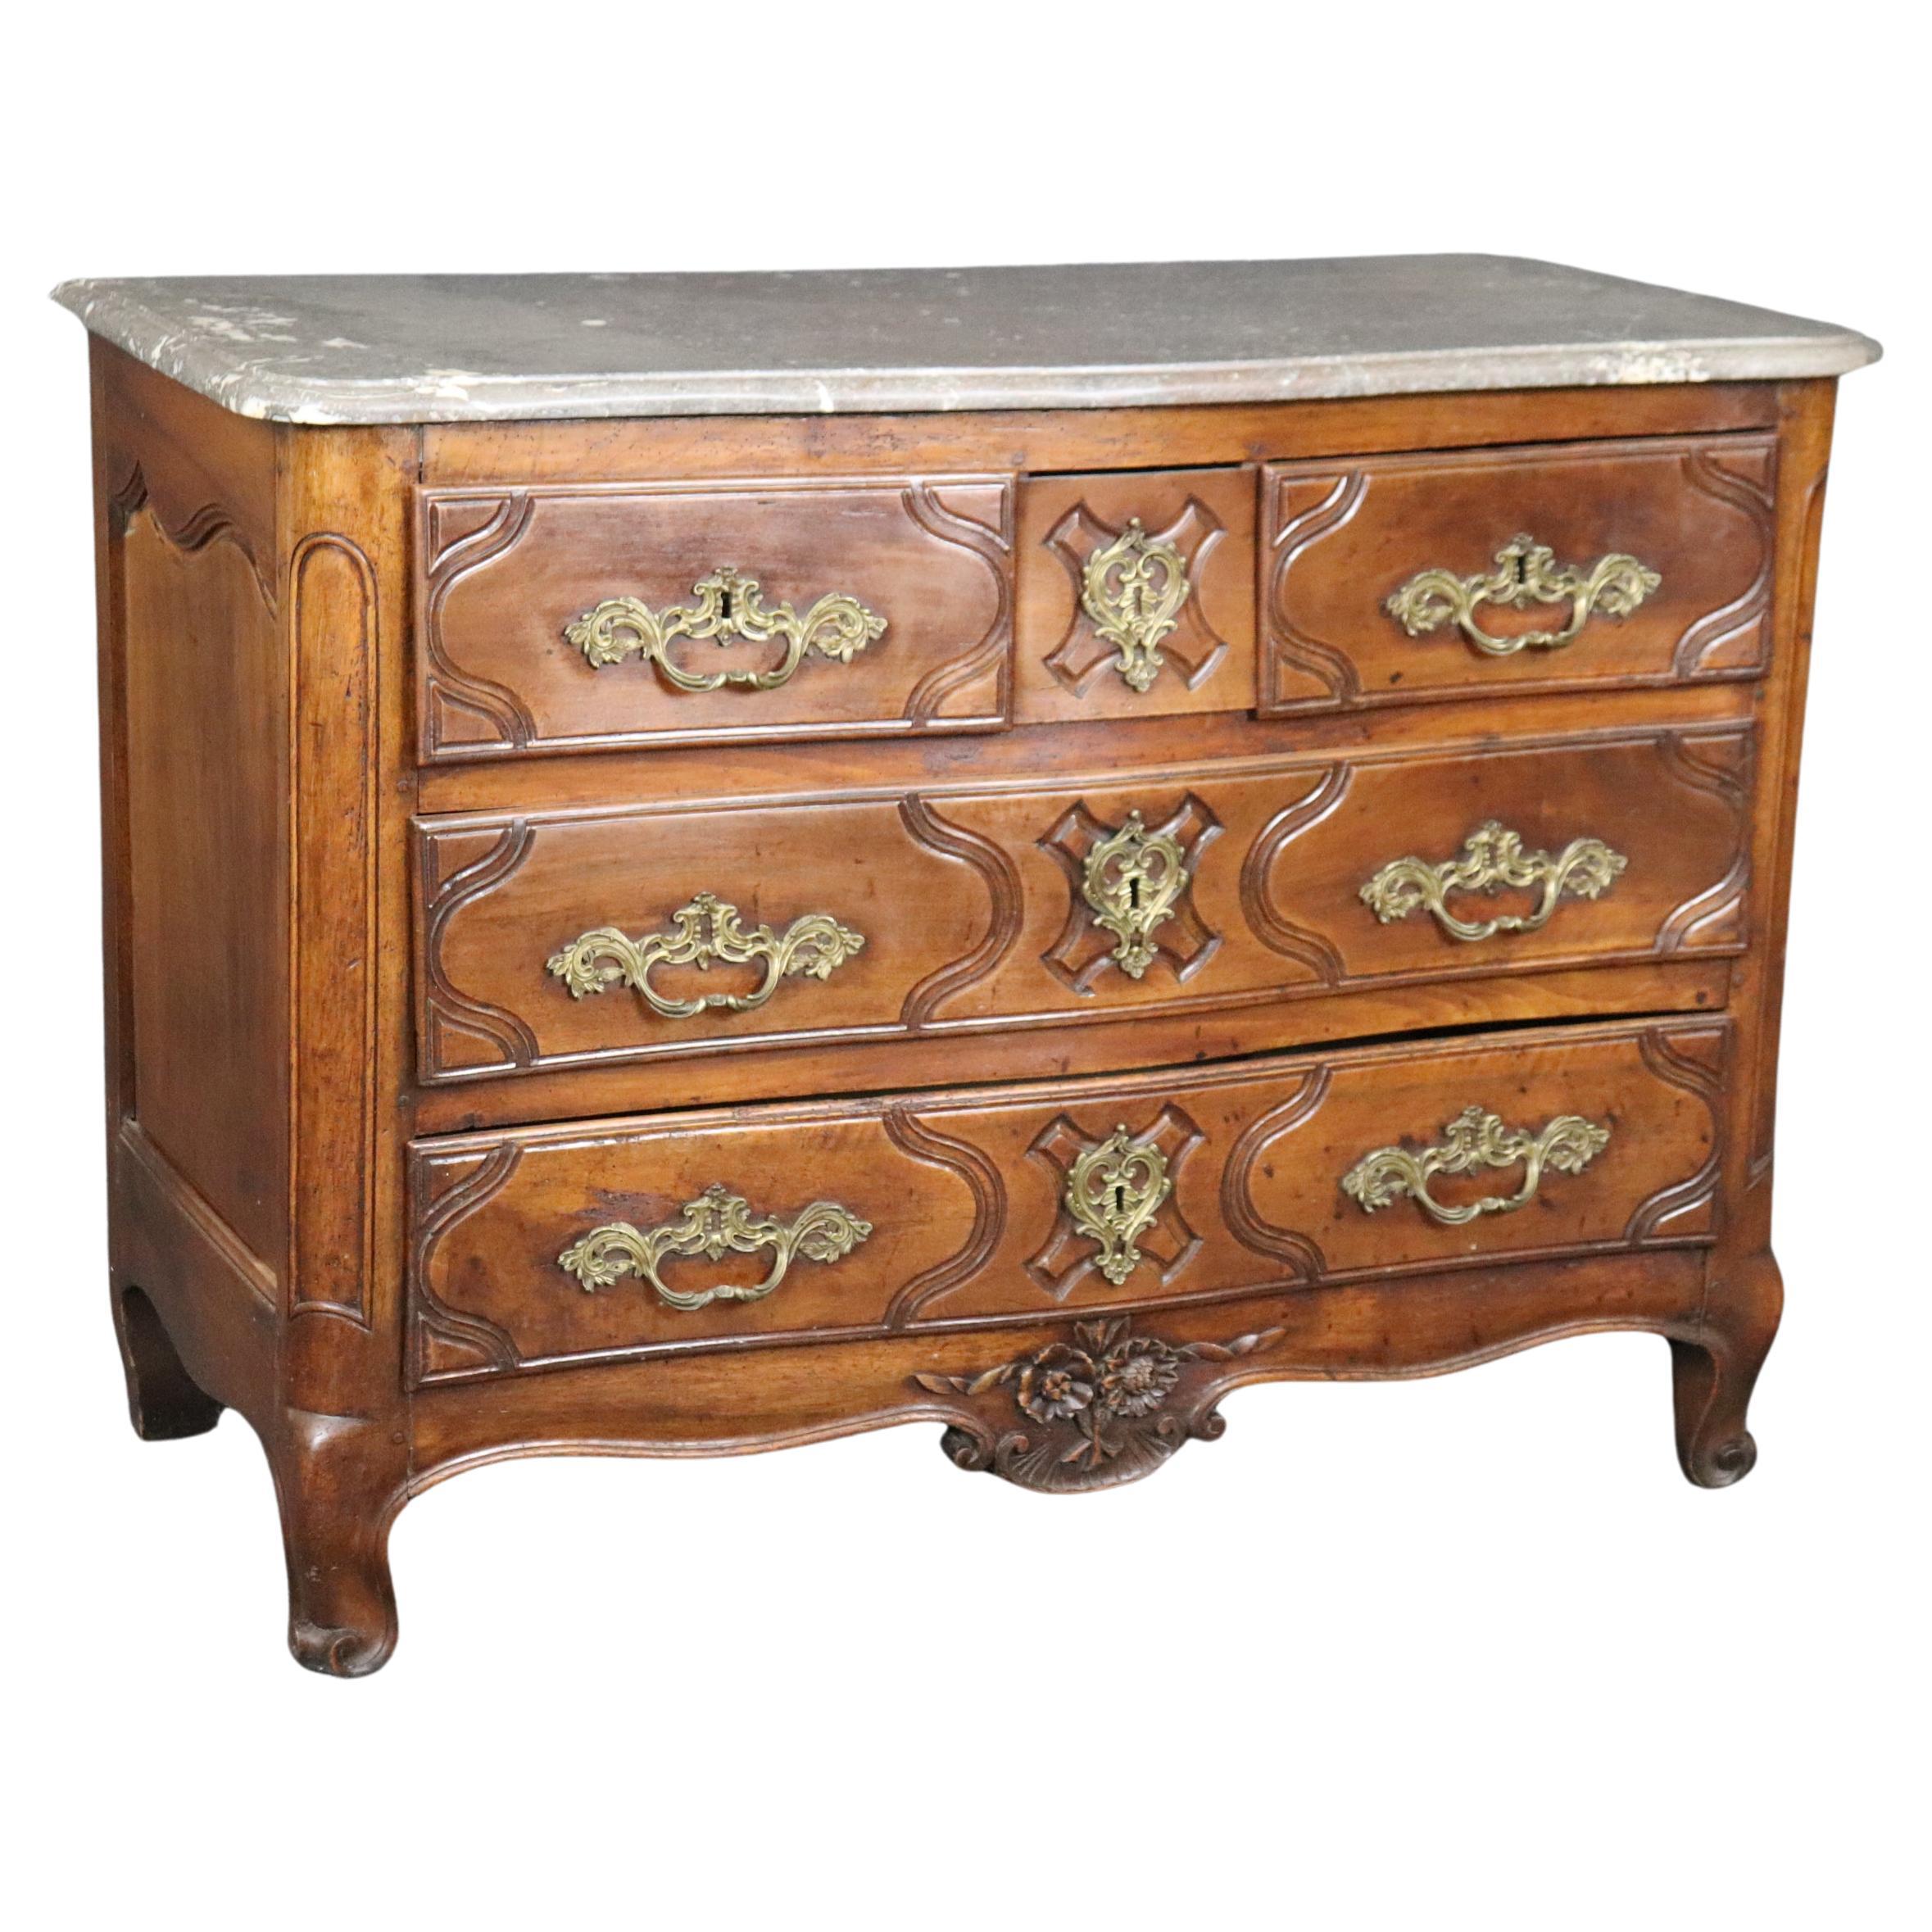 Period French Louis XV Walnut Marble Top Bronze Mounted Commode For Sale